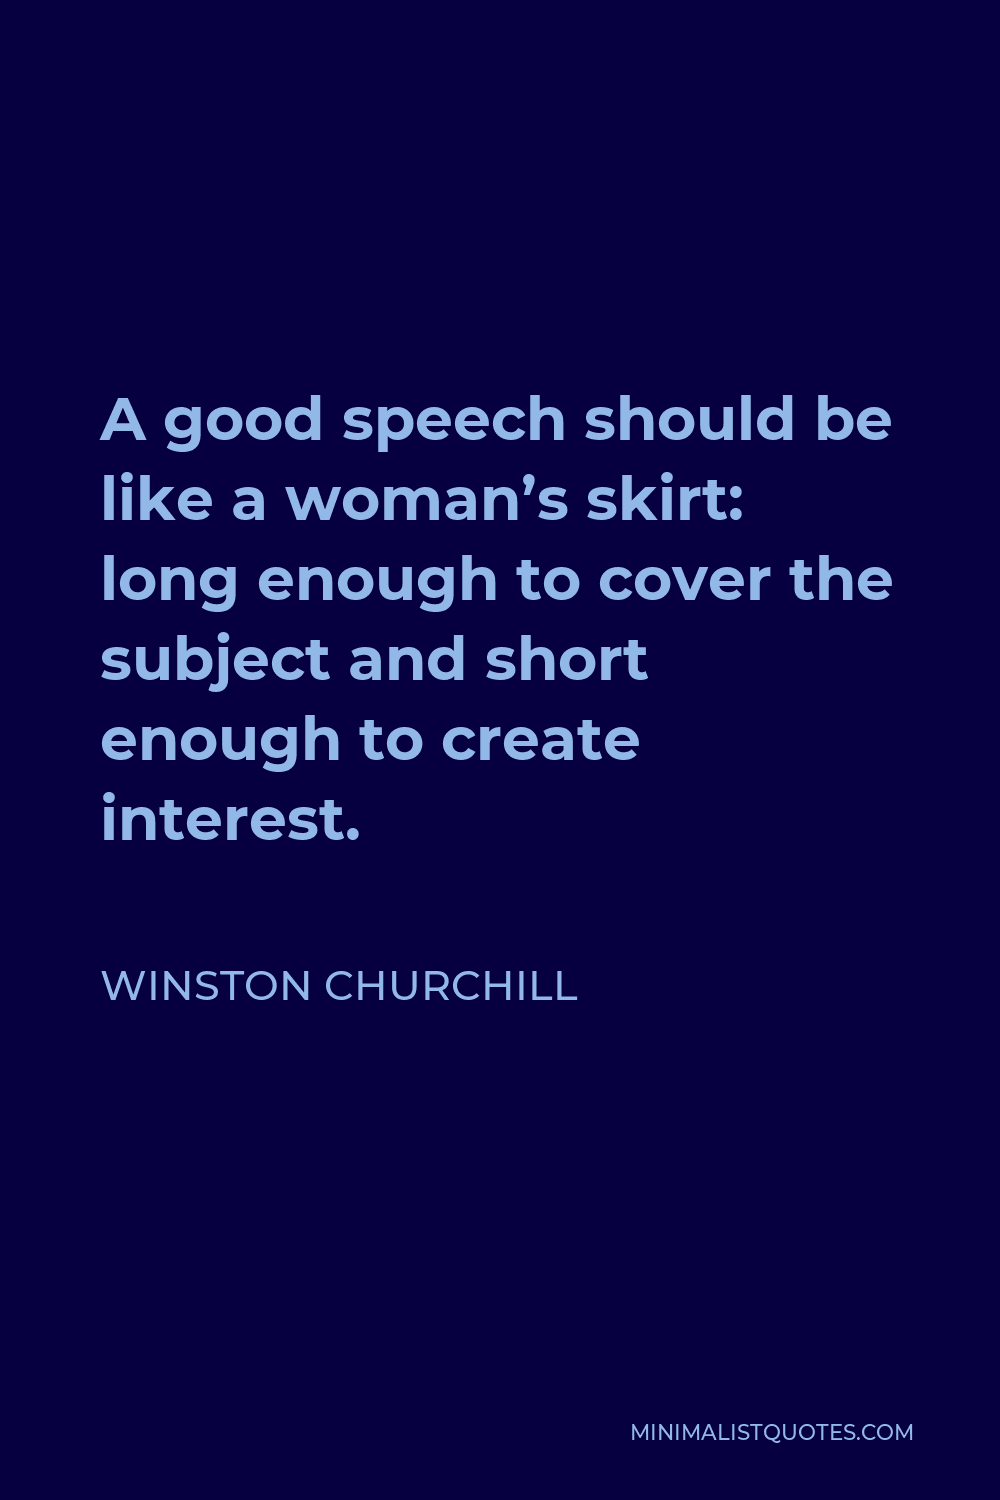 Winston Churchill Quote - A good speech should be like a woman’s skirt: long enough to cover the subject and short enough to create interest.